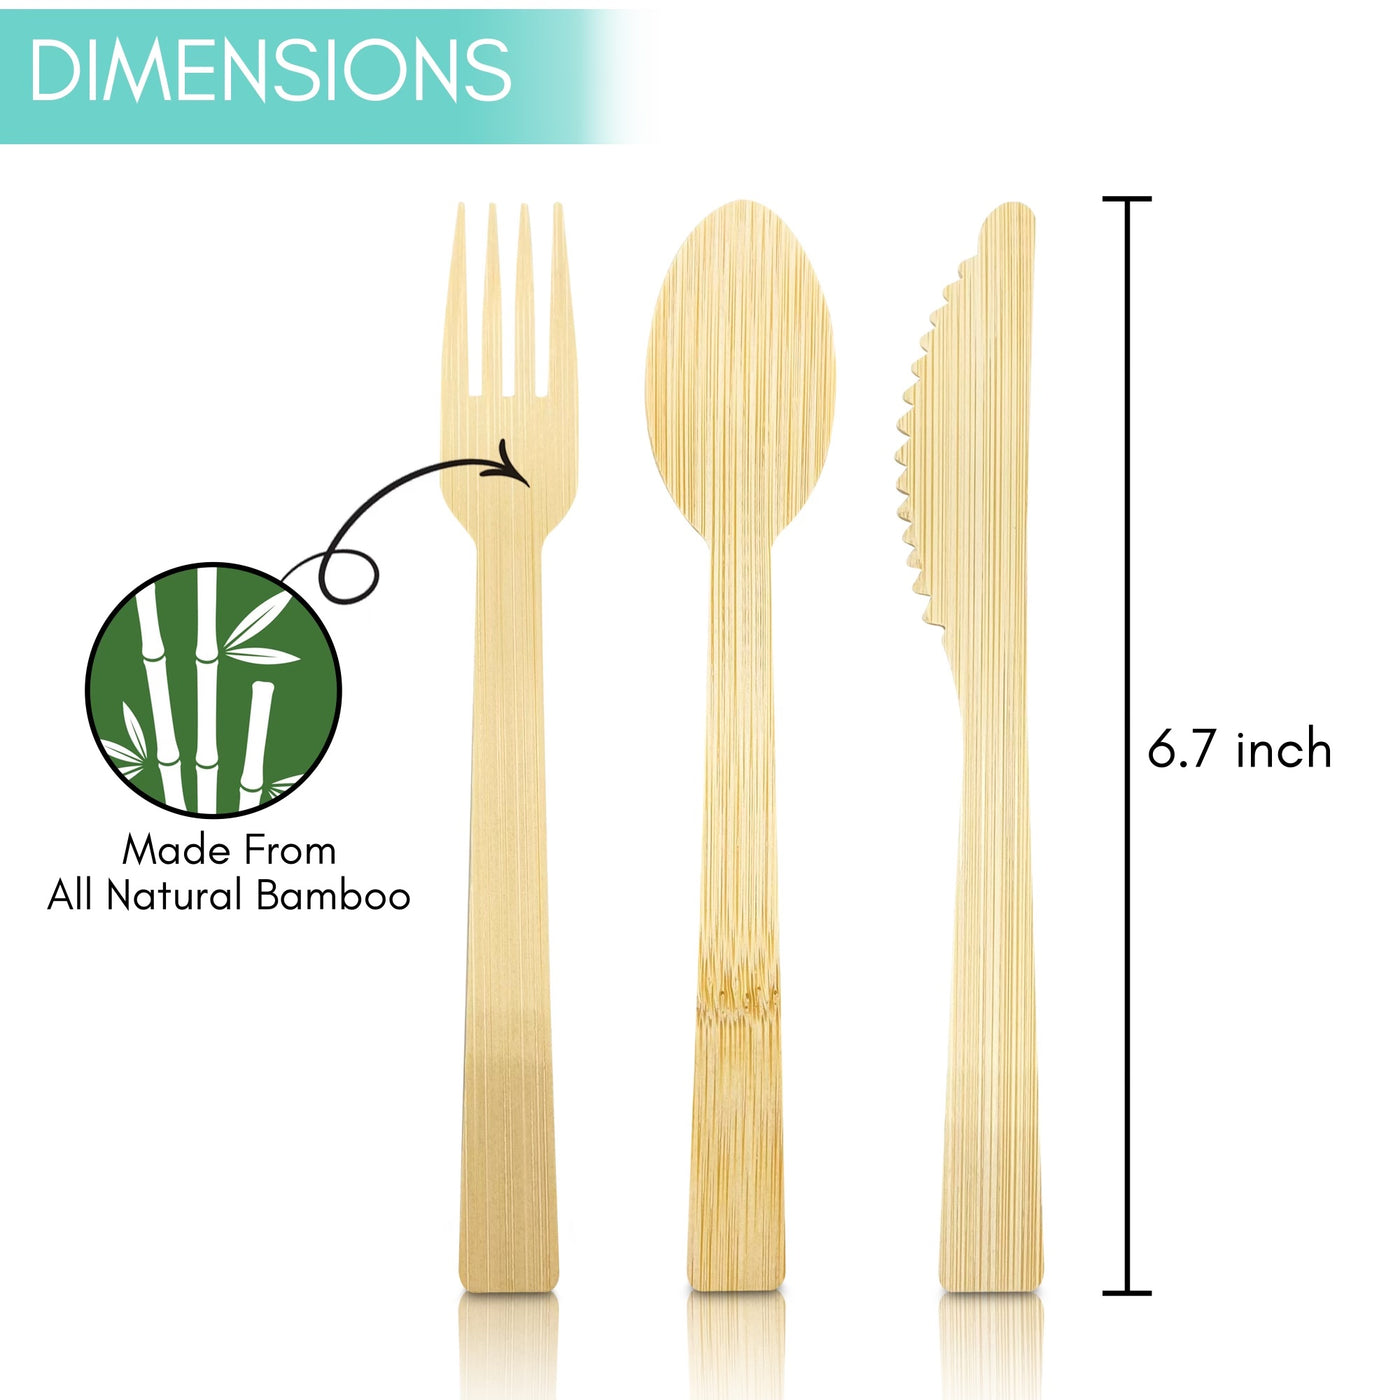 Bamboo Cutlery Sets, individually wrapped: 50 count